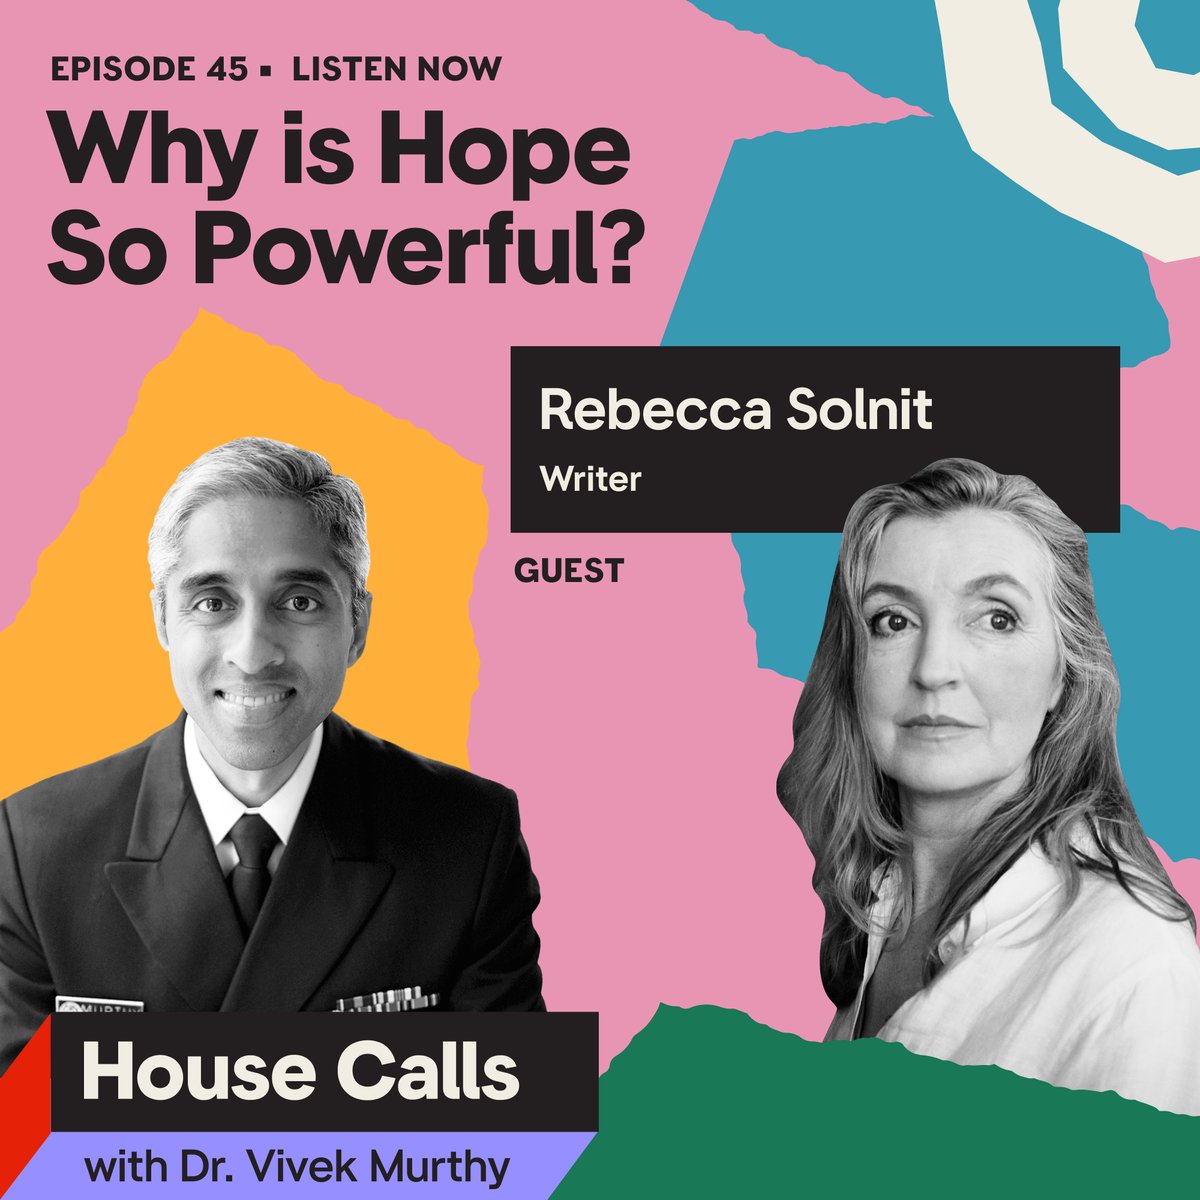 NEW: how do we find hope during difficult times? In the latest conversation on #HouseCallswithVivekMurthy, writer @rebeccasolnit and I discuss how hope is more than a feeling—it is an action. And a powerful counter to despair and uncertainty. Listen today: bit.ly/3TCQ8gw